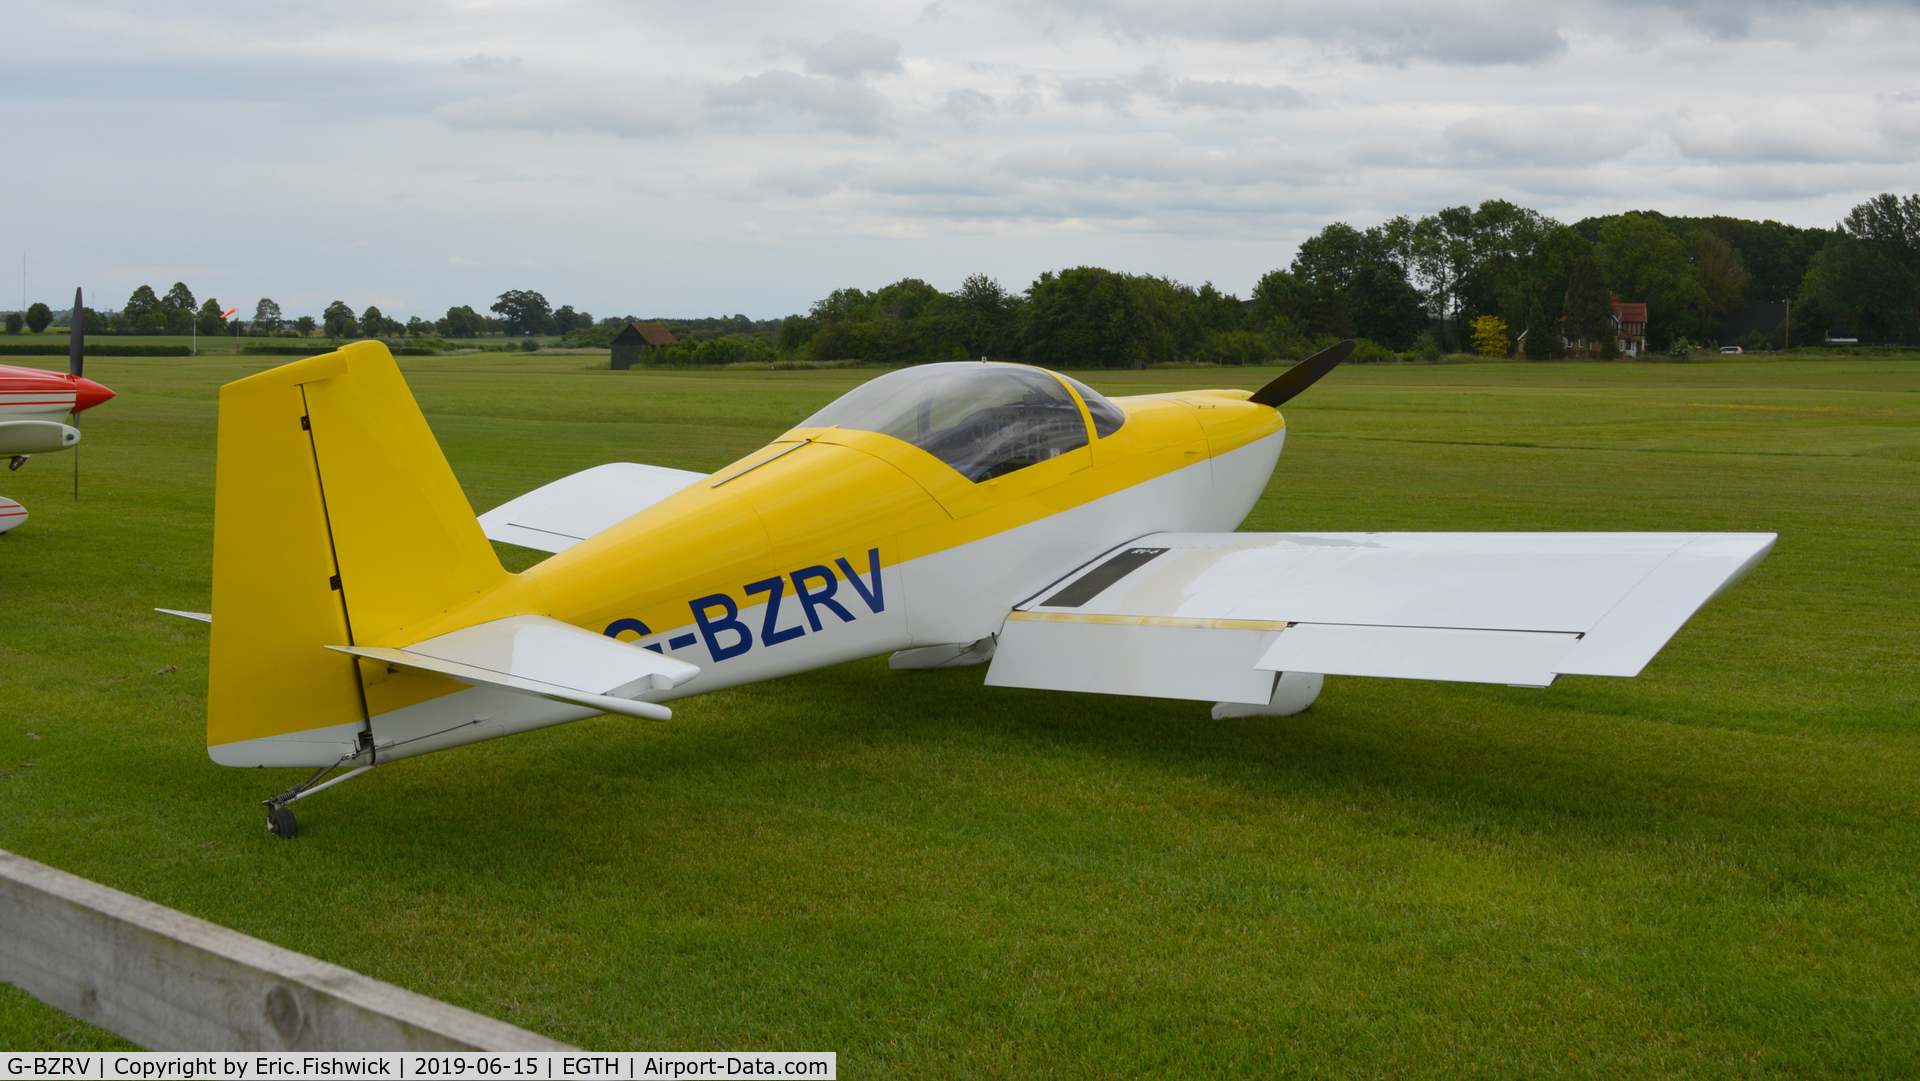 G-BZRV, 2002 Vans RV-6 C/N PFA 181A-13573, 2. G-BZRV at The Evening Airshow at The Shuttleworth Collection, June, 2019.